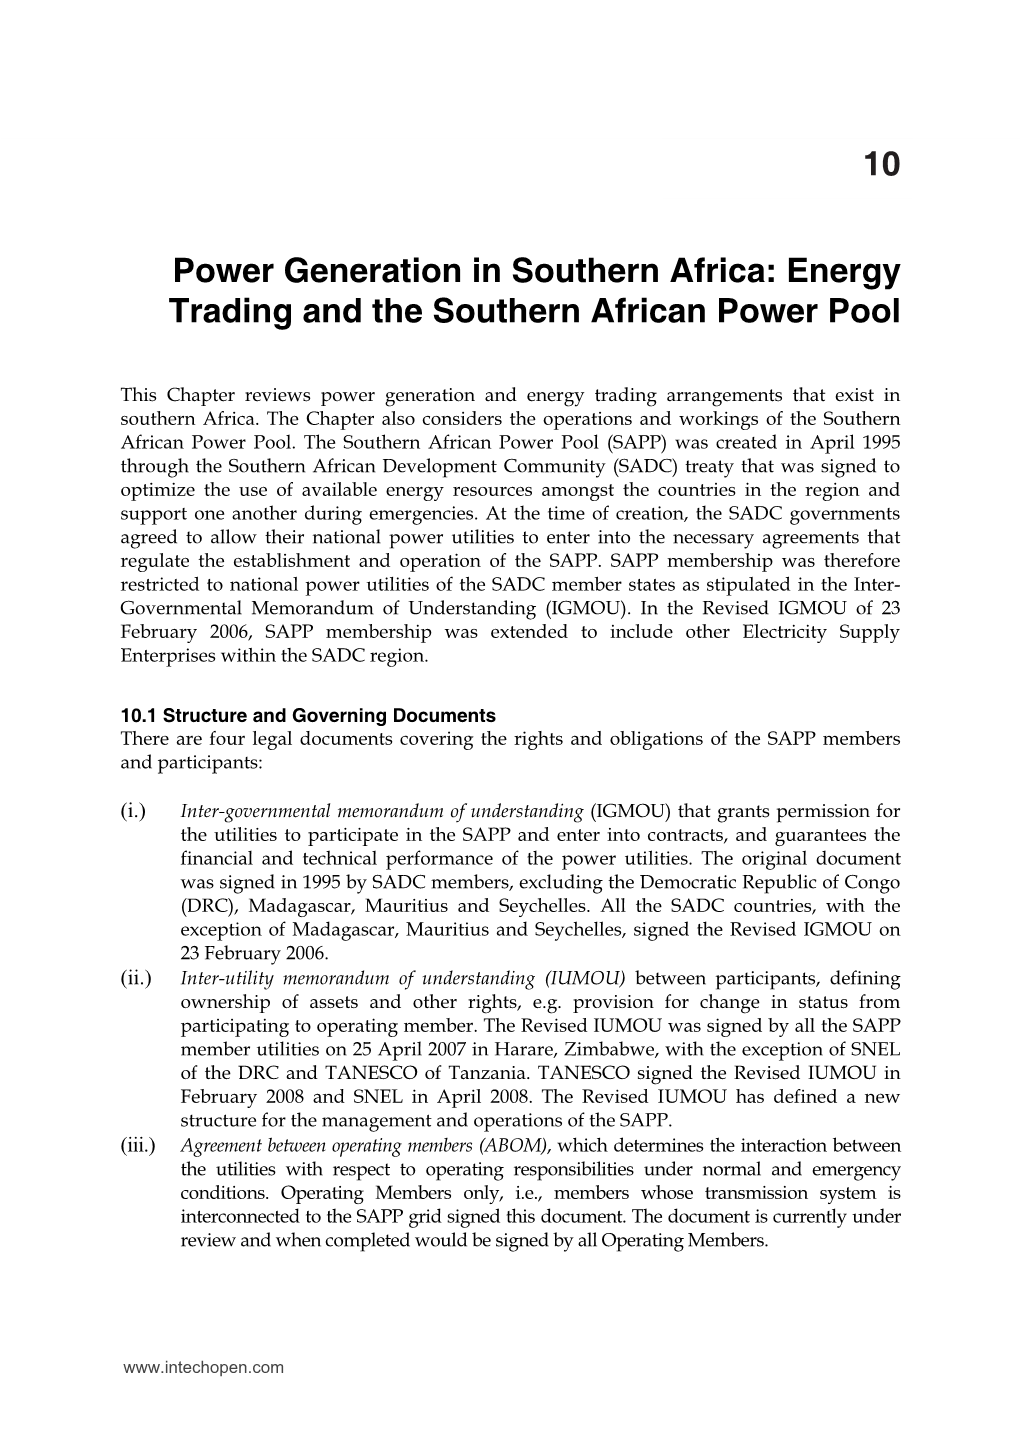 Energy Trading and the Southern African Power Pool 10